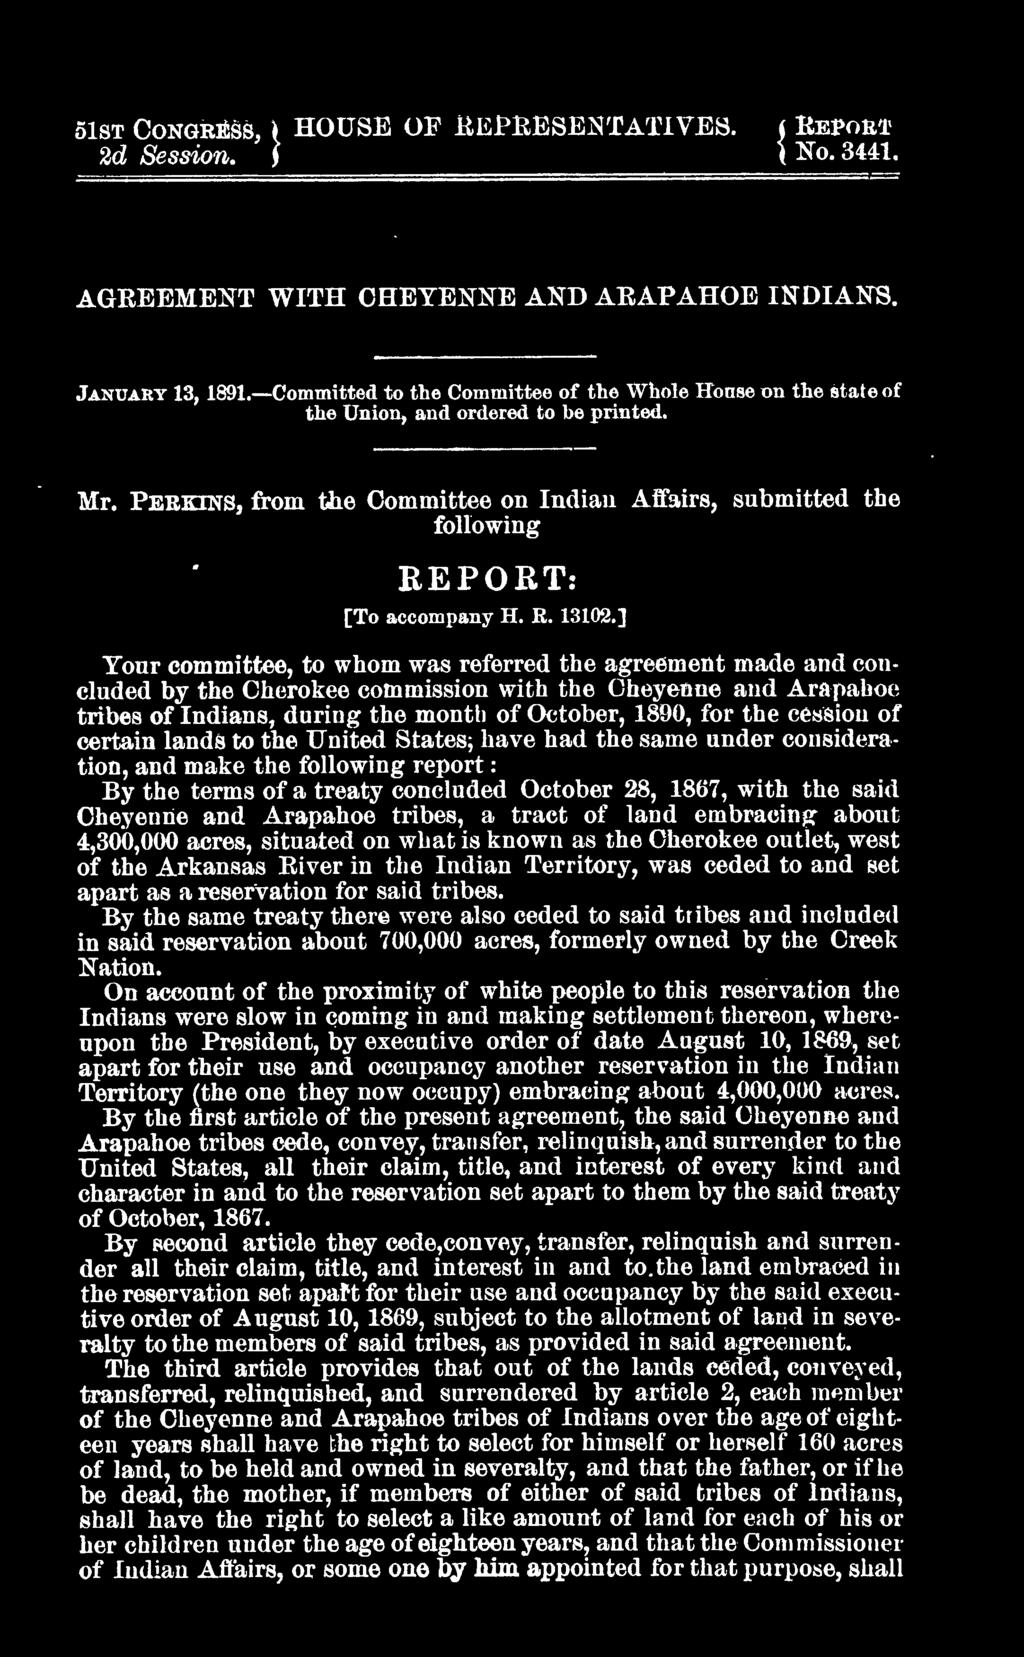 ce:;siou of certain lands to the United States, have bad the same under consideration, and make the following report : By the terms of a treaty concluded October 28, 1867, with the said.